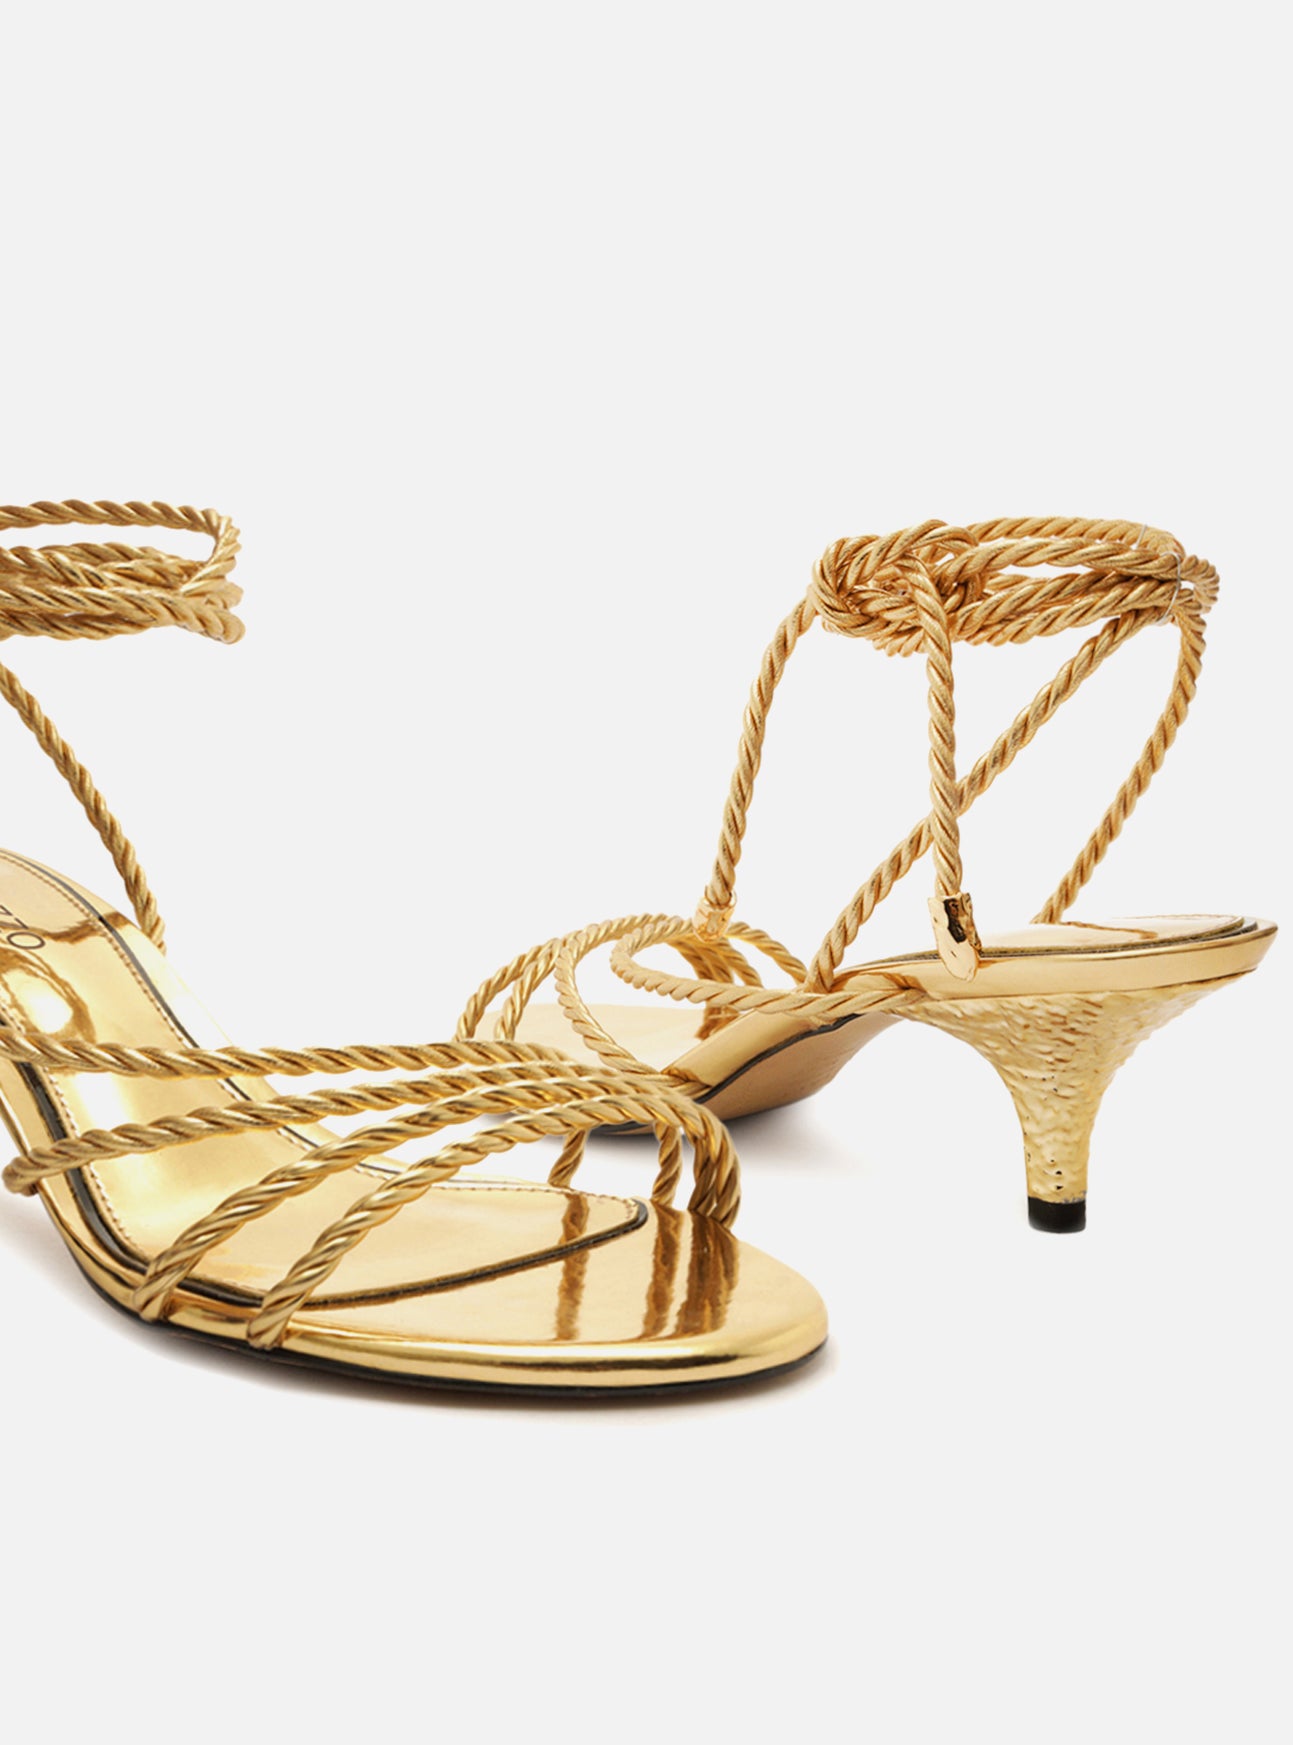 The Campaign Gold Strappy Sandal